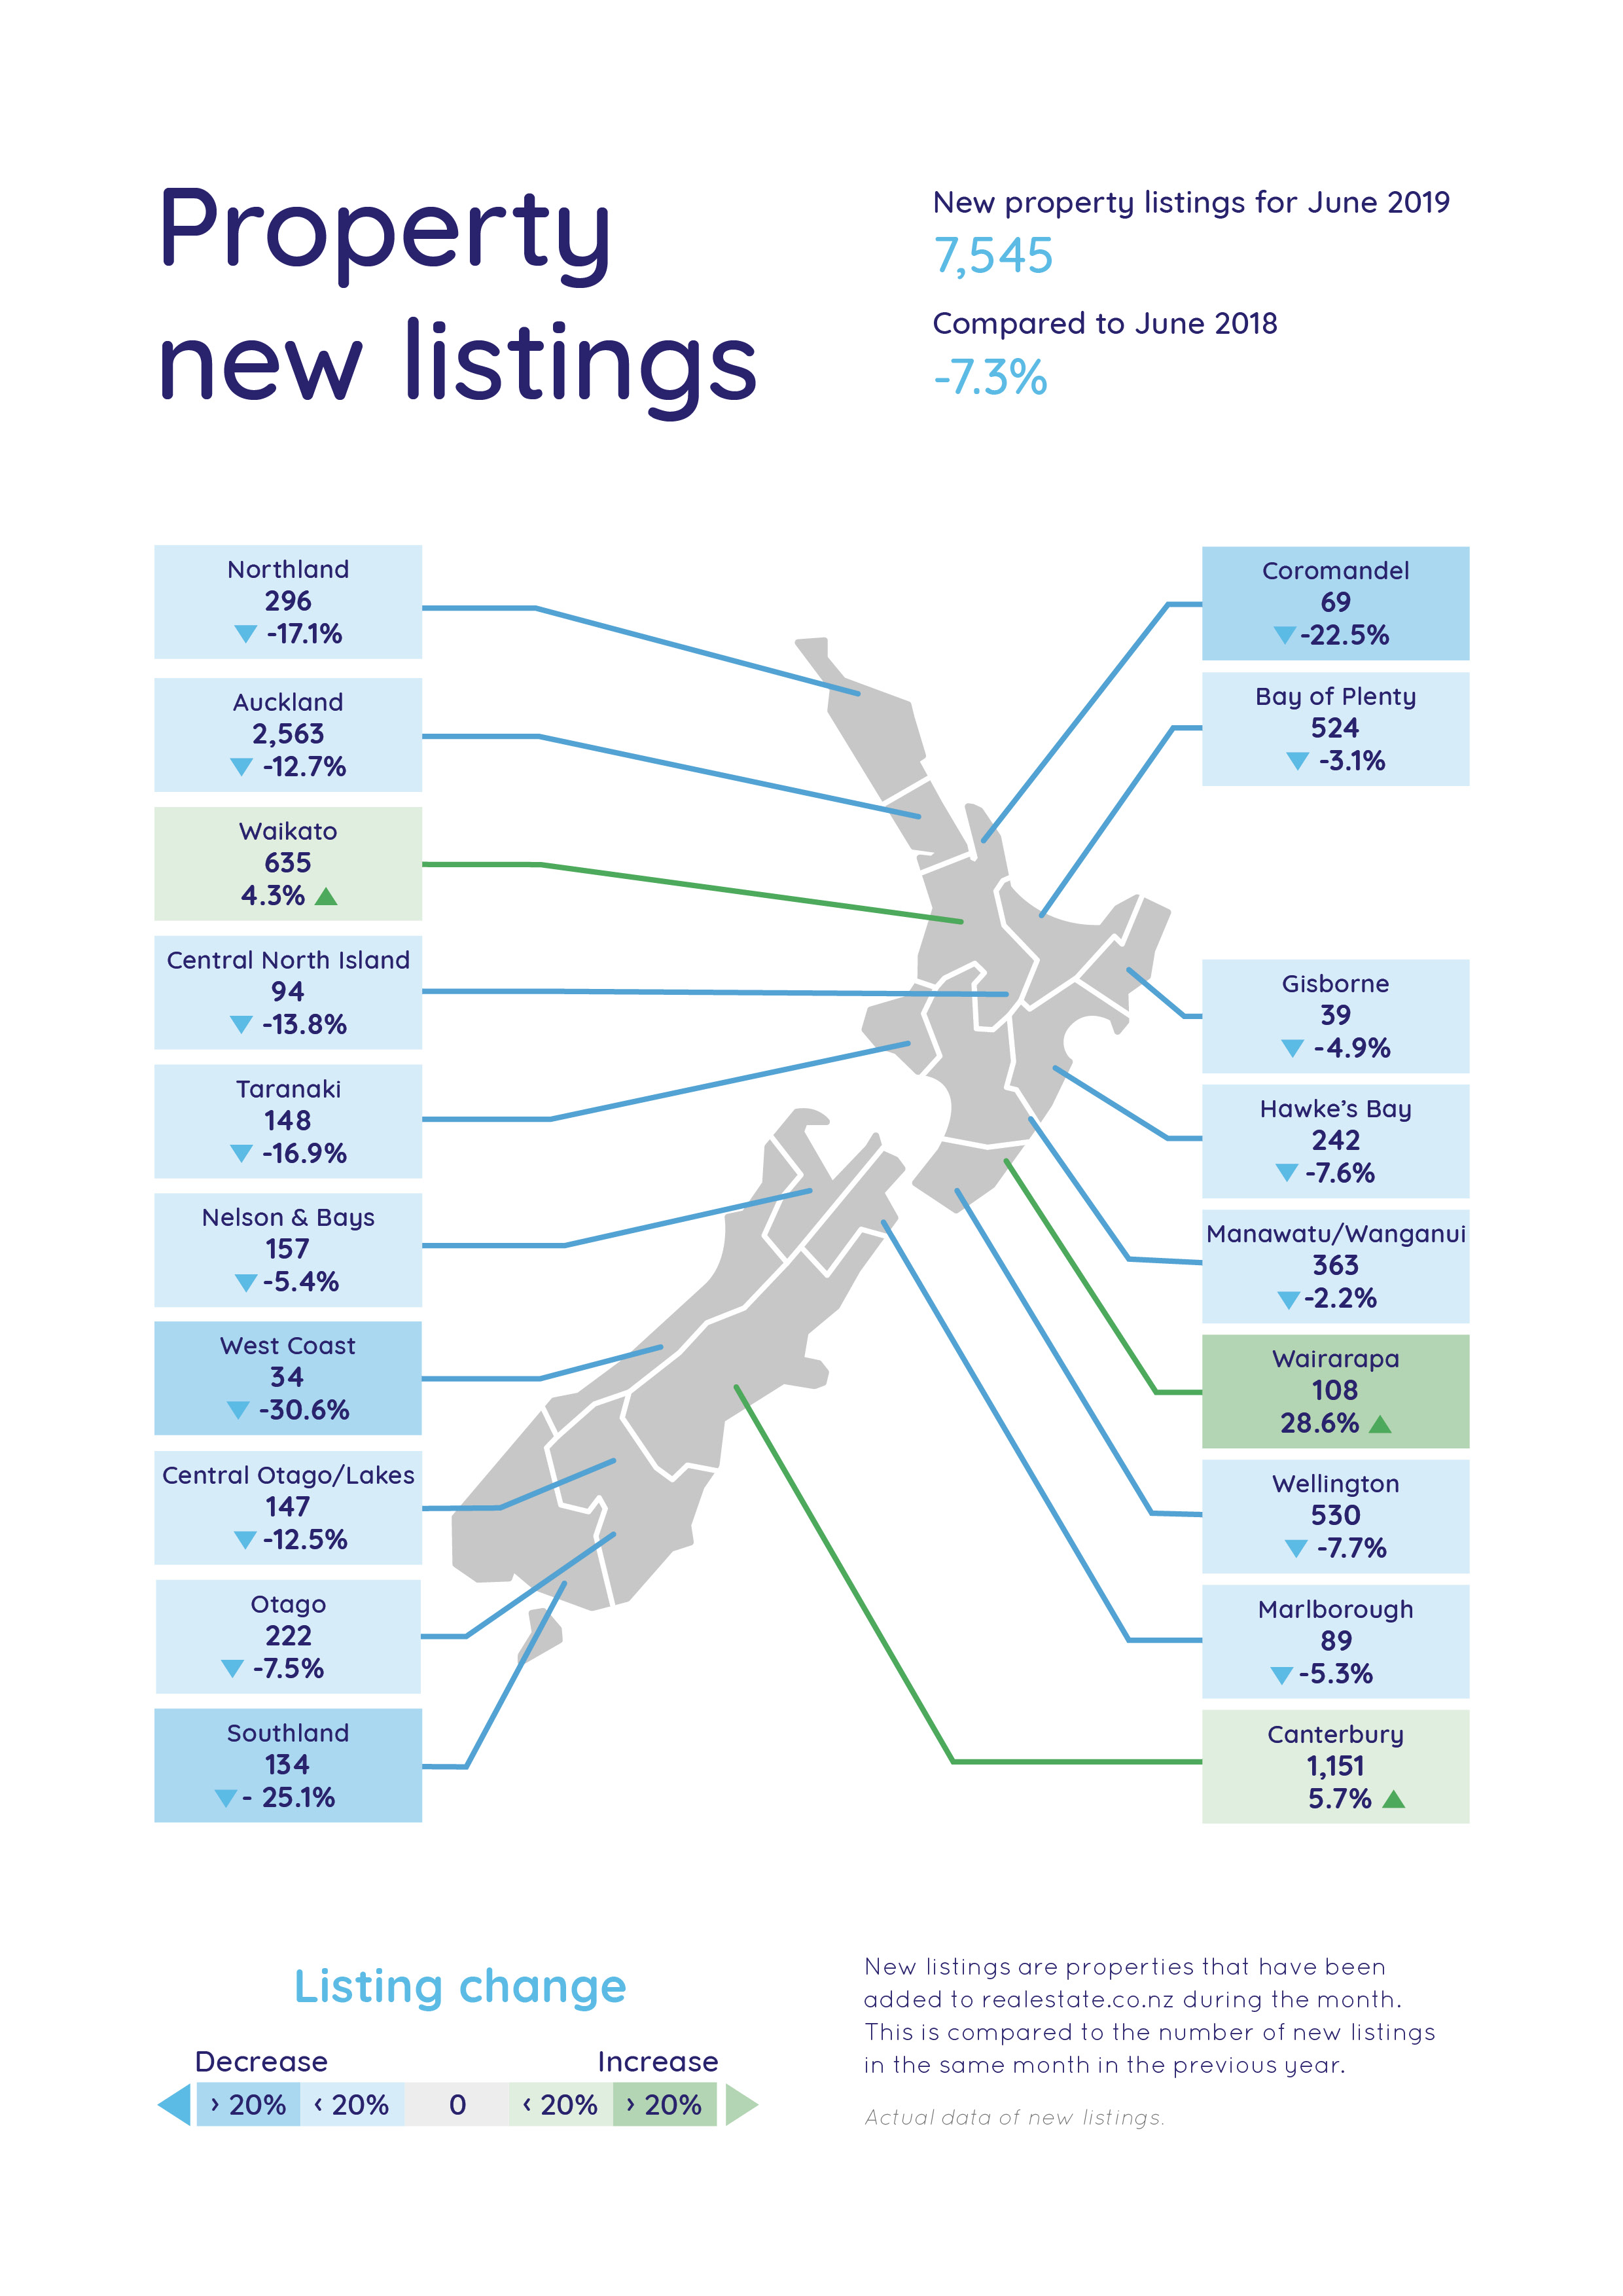 New Property Listings in New Zealand